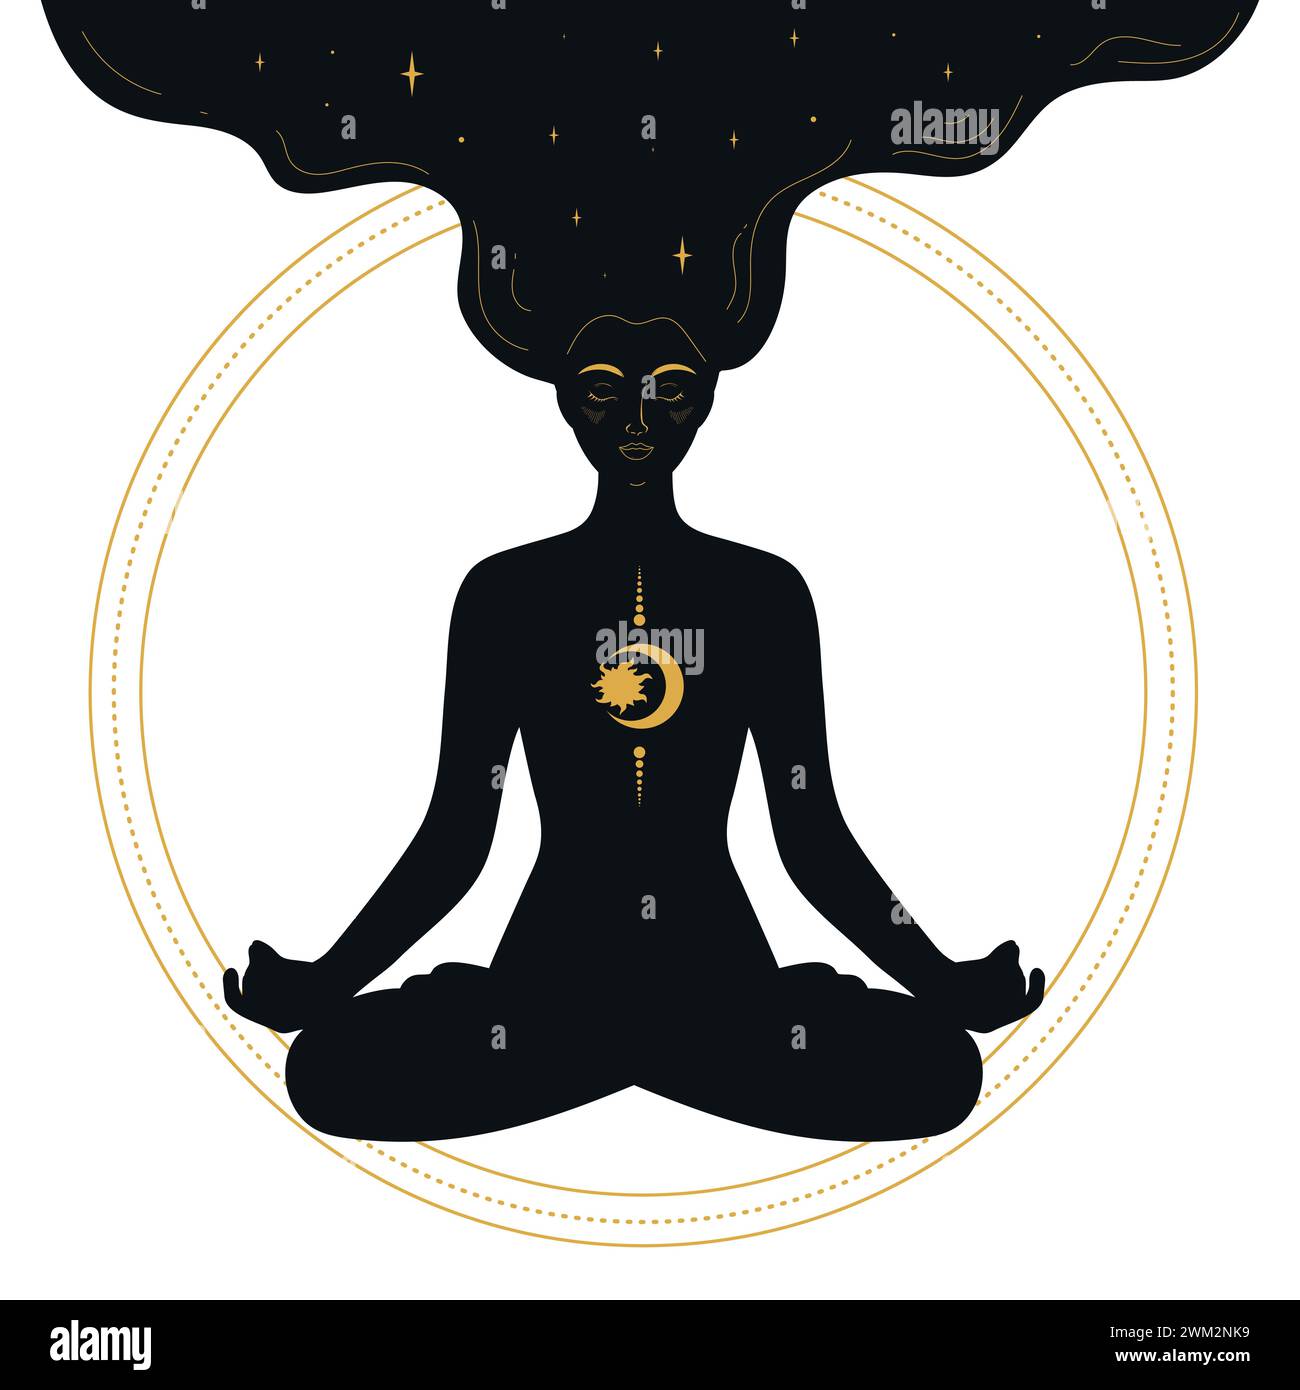 Tree yoga logo. Silhouette of a person in meditation in a round